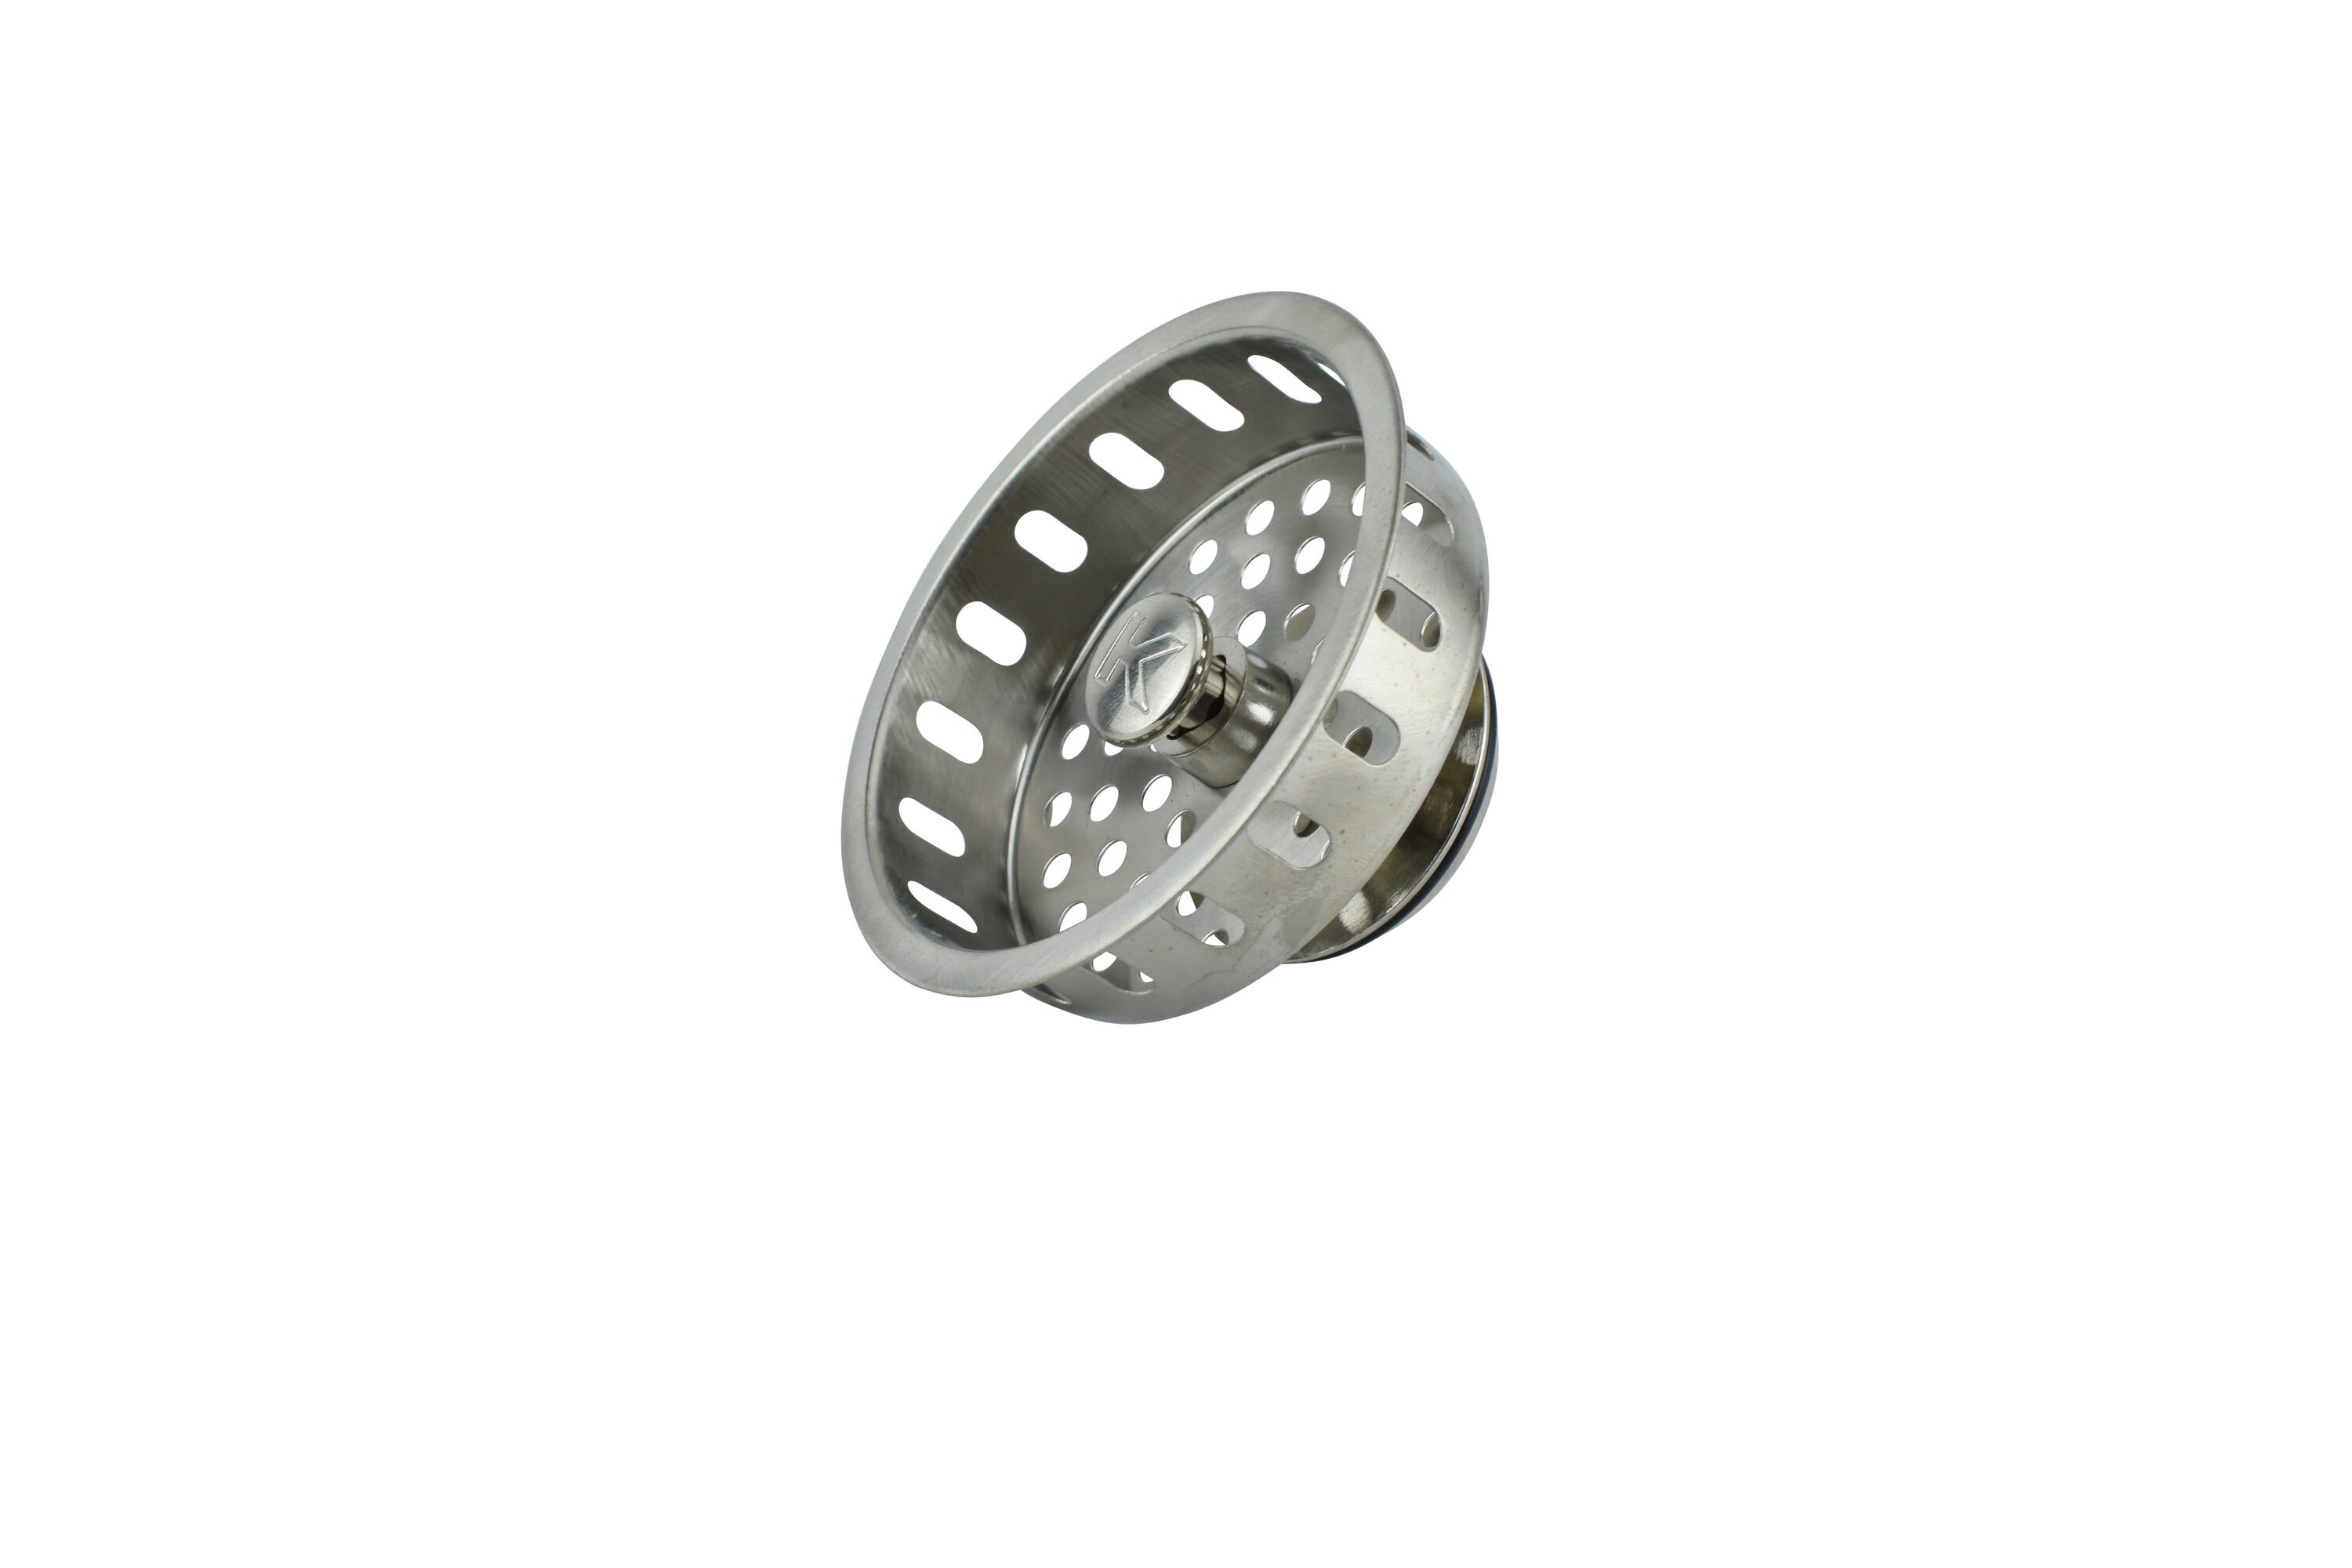 Keeney Brushed Kitchen Sink Strainers & Strainer Baskets at Lowes.com